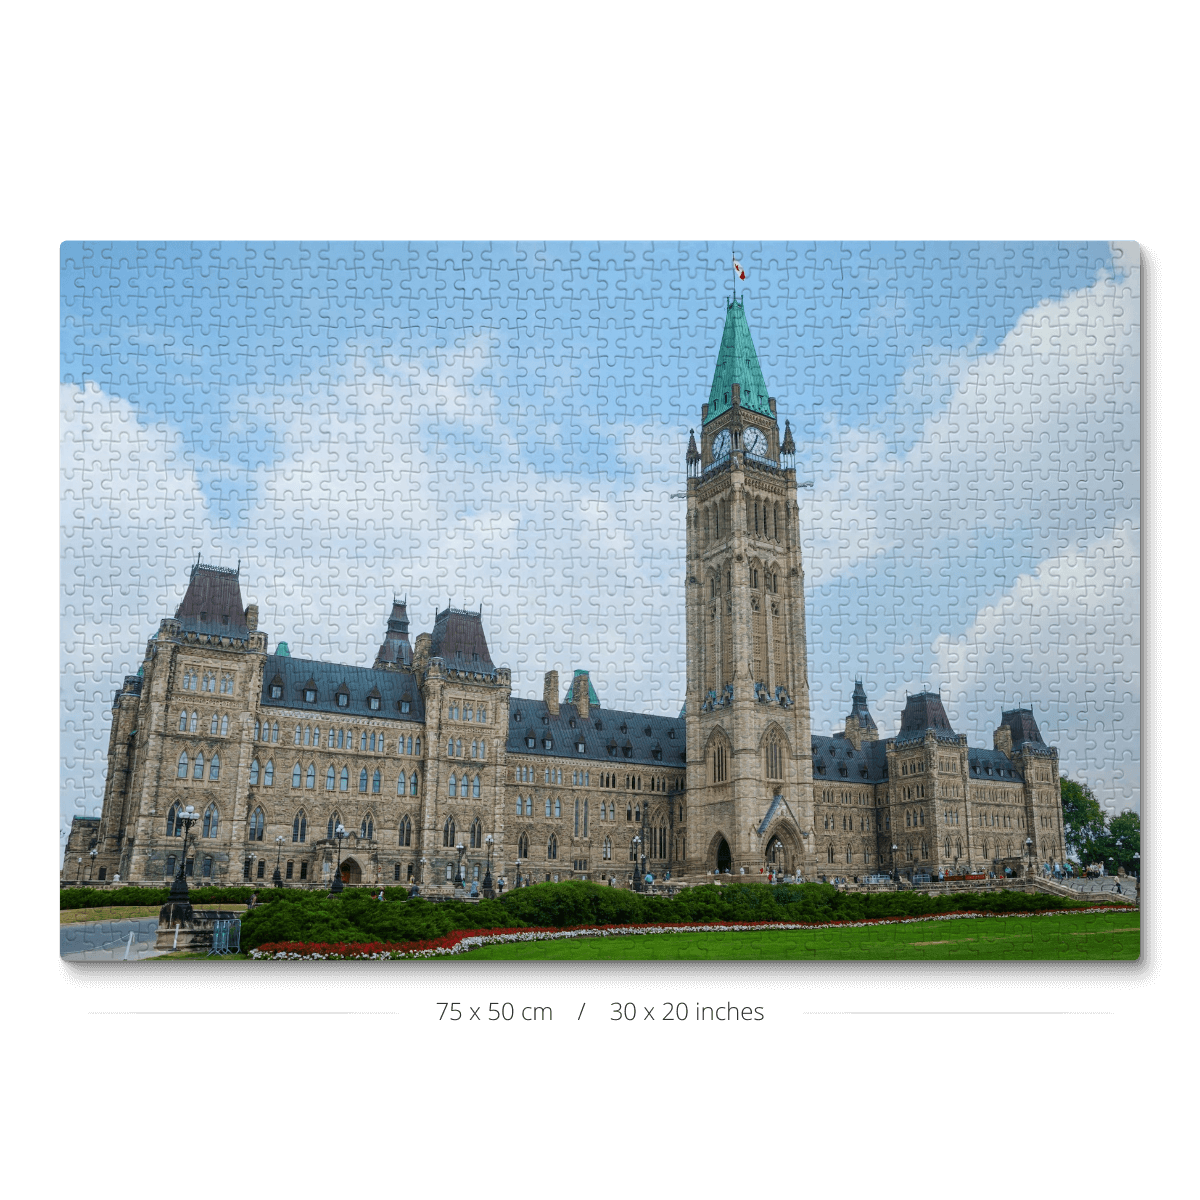 A 1000-piece jigsaw puzzle featuring a photo of Ottawa Parliament, showcasing its iconic architecture.